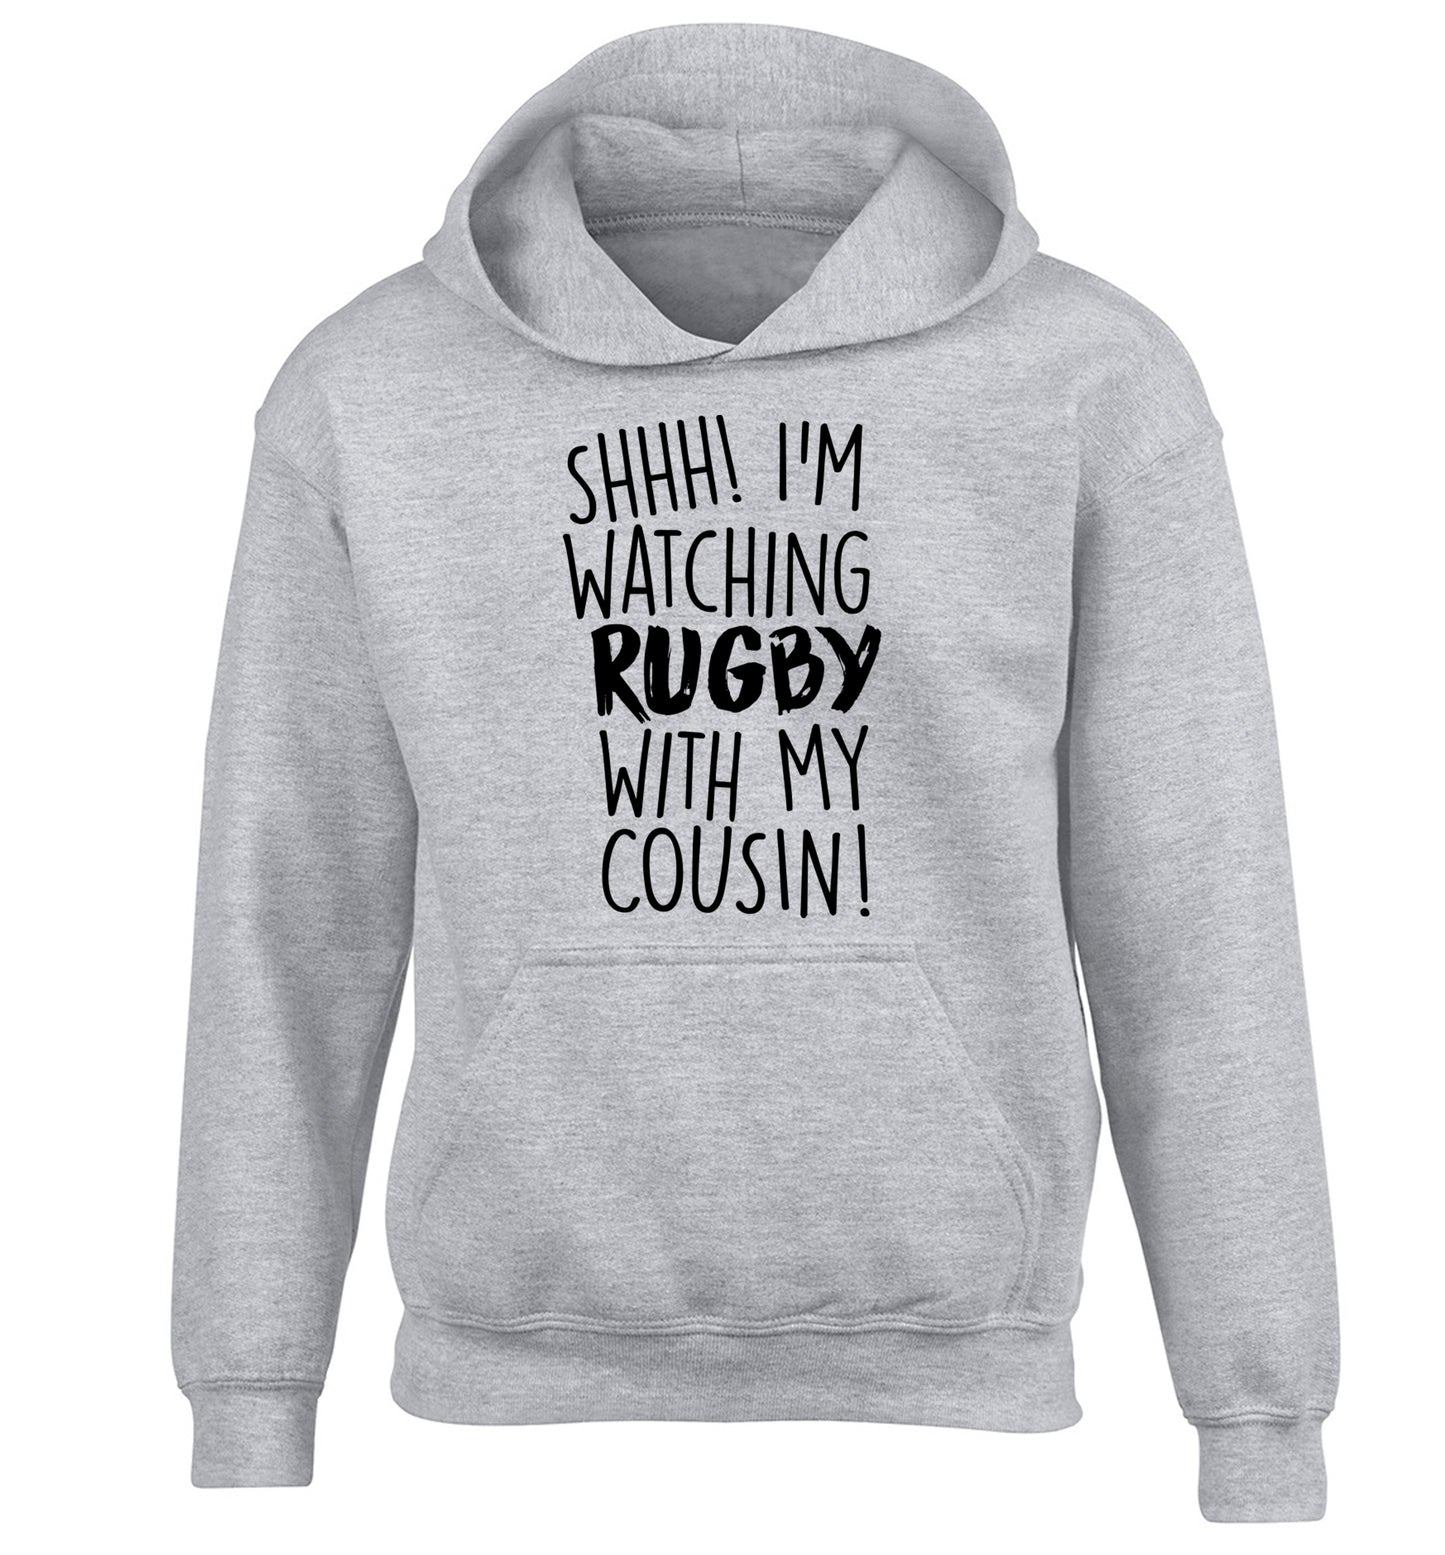 Shhh I'm watching rugby with my cousin children's grey hoodie 12-13 Years